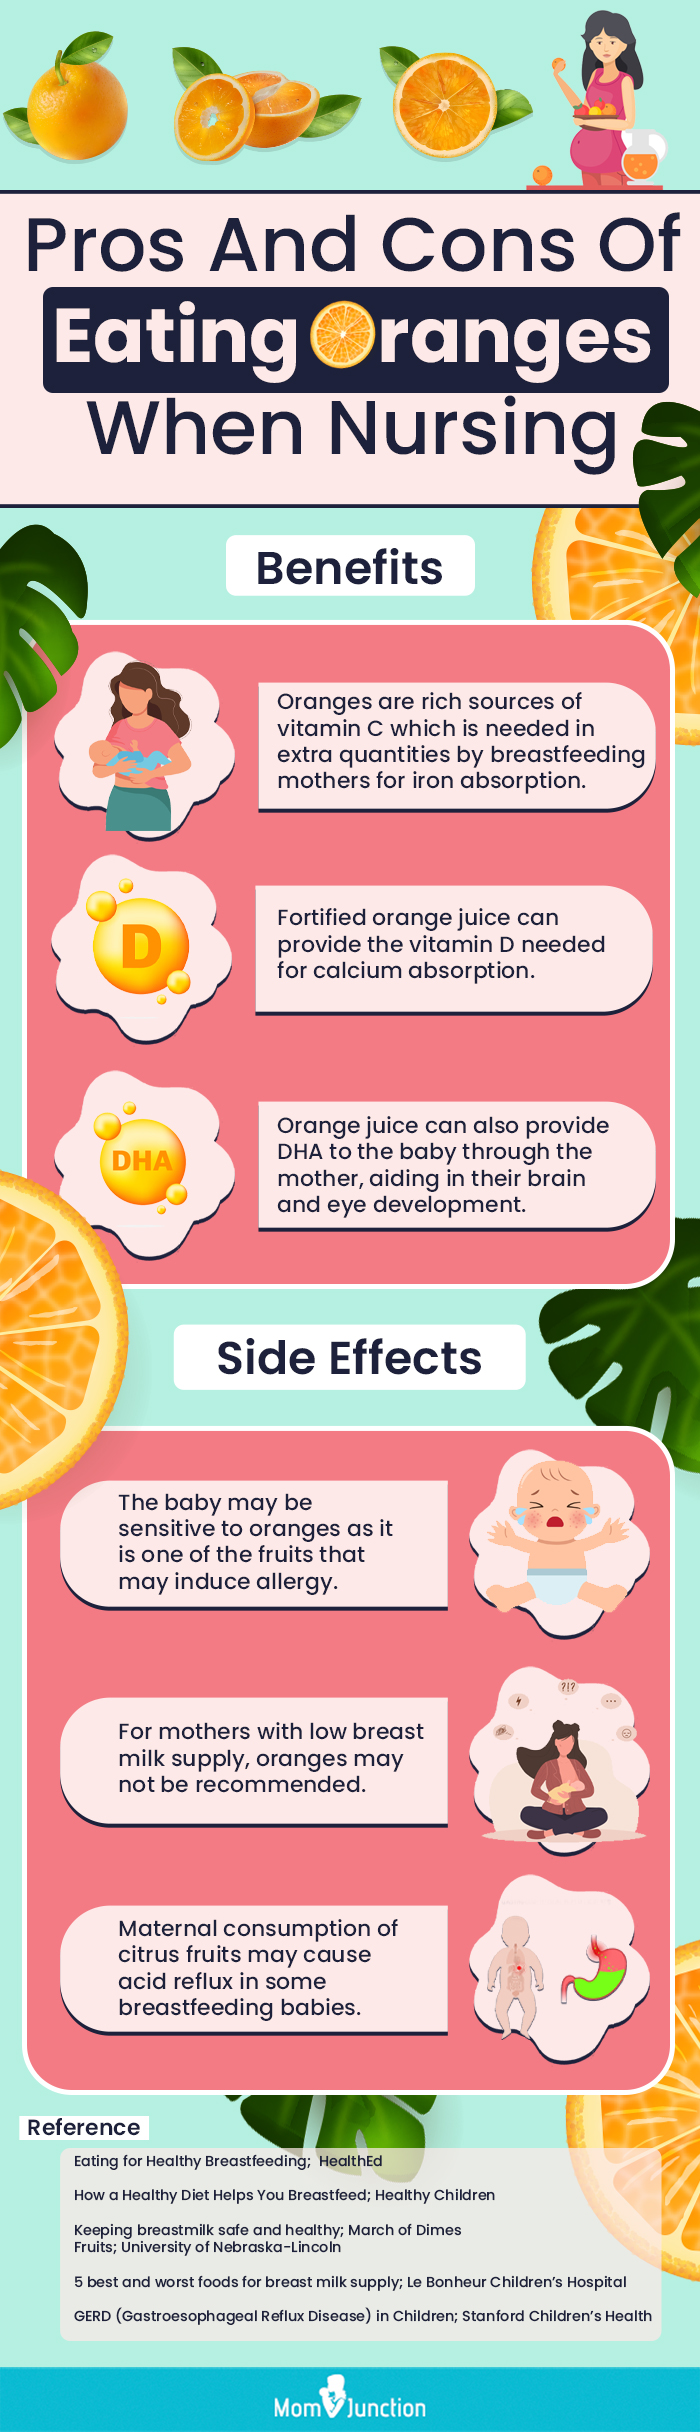 pros and cons of eating oranges when nursing (infographic)